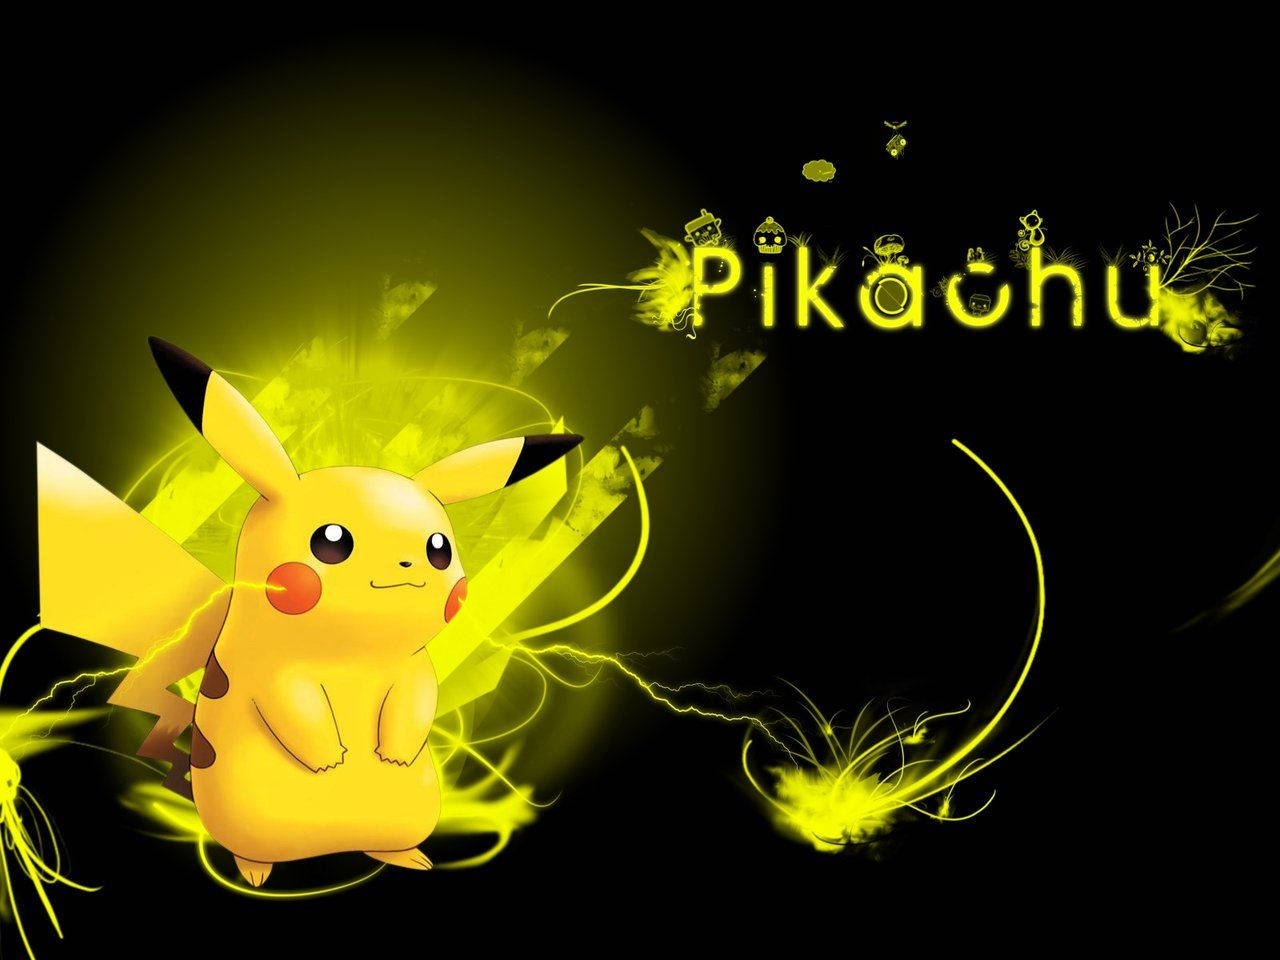 Pikachu 3d With Yellow Electricity